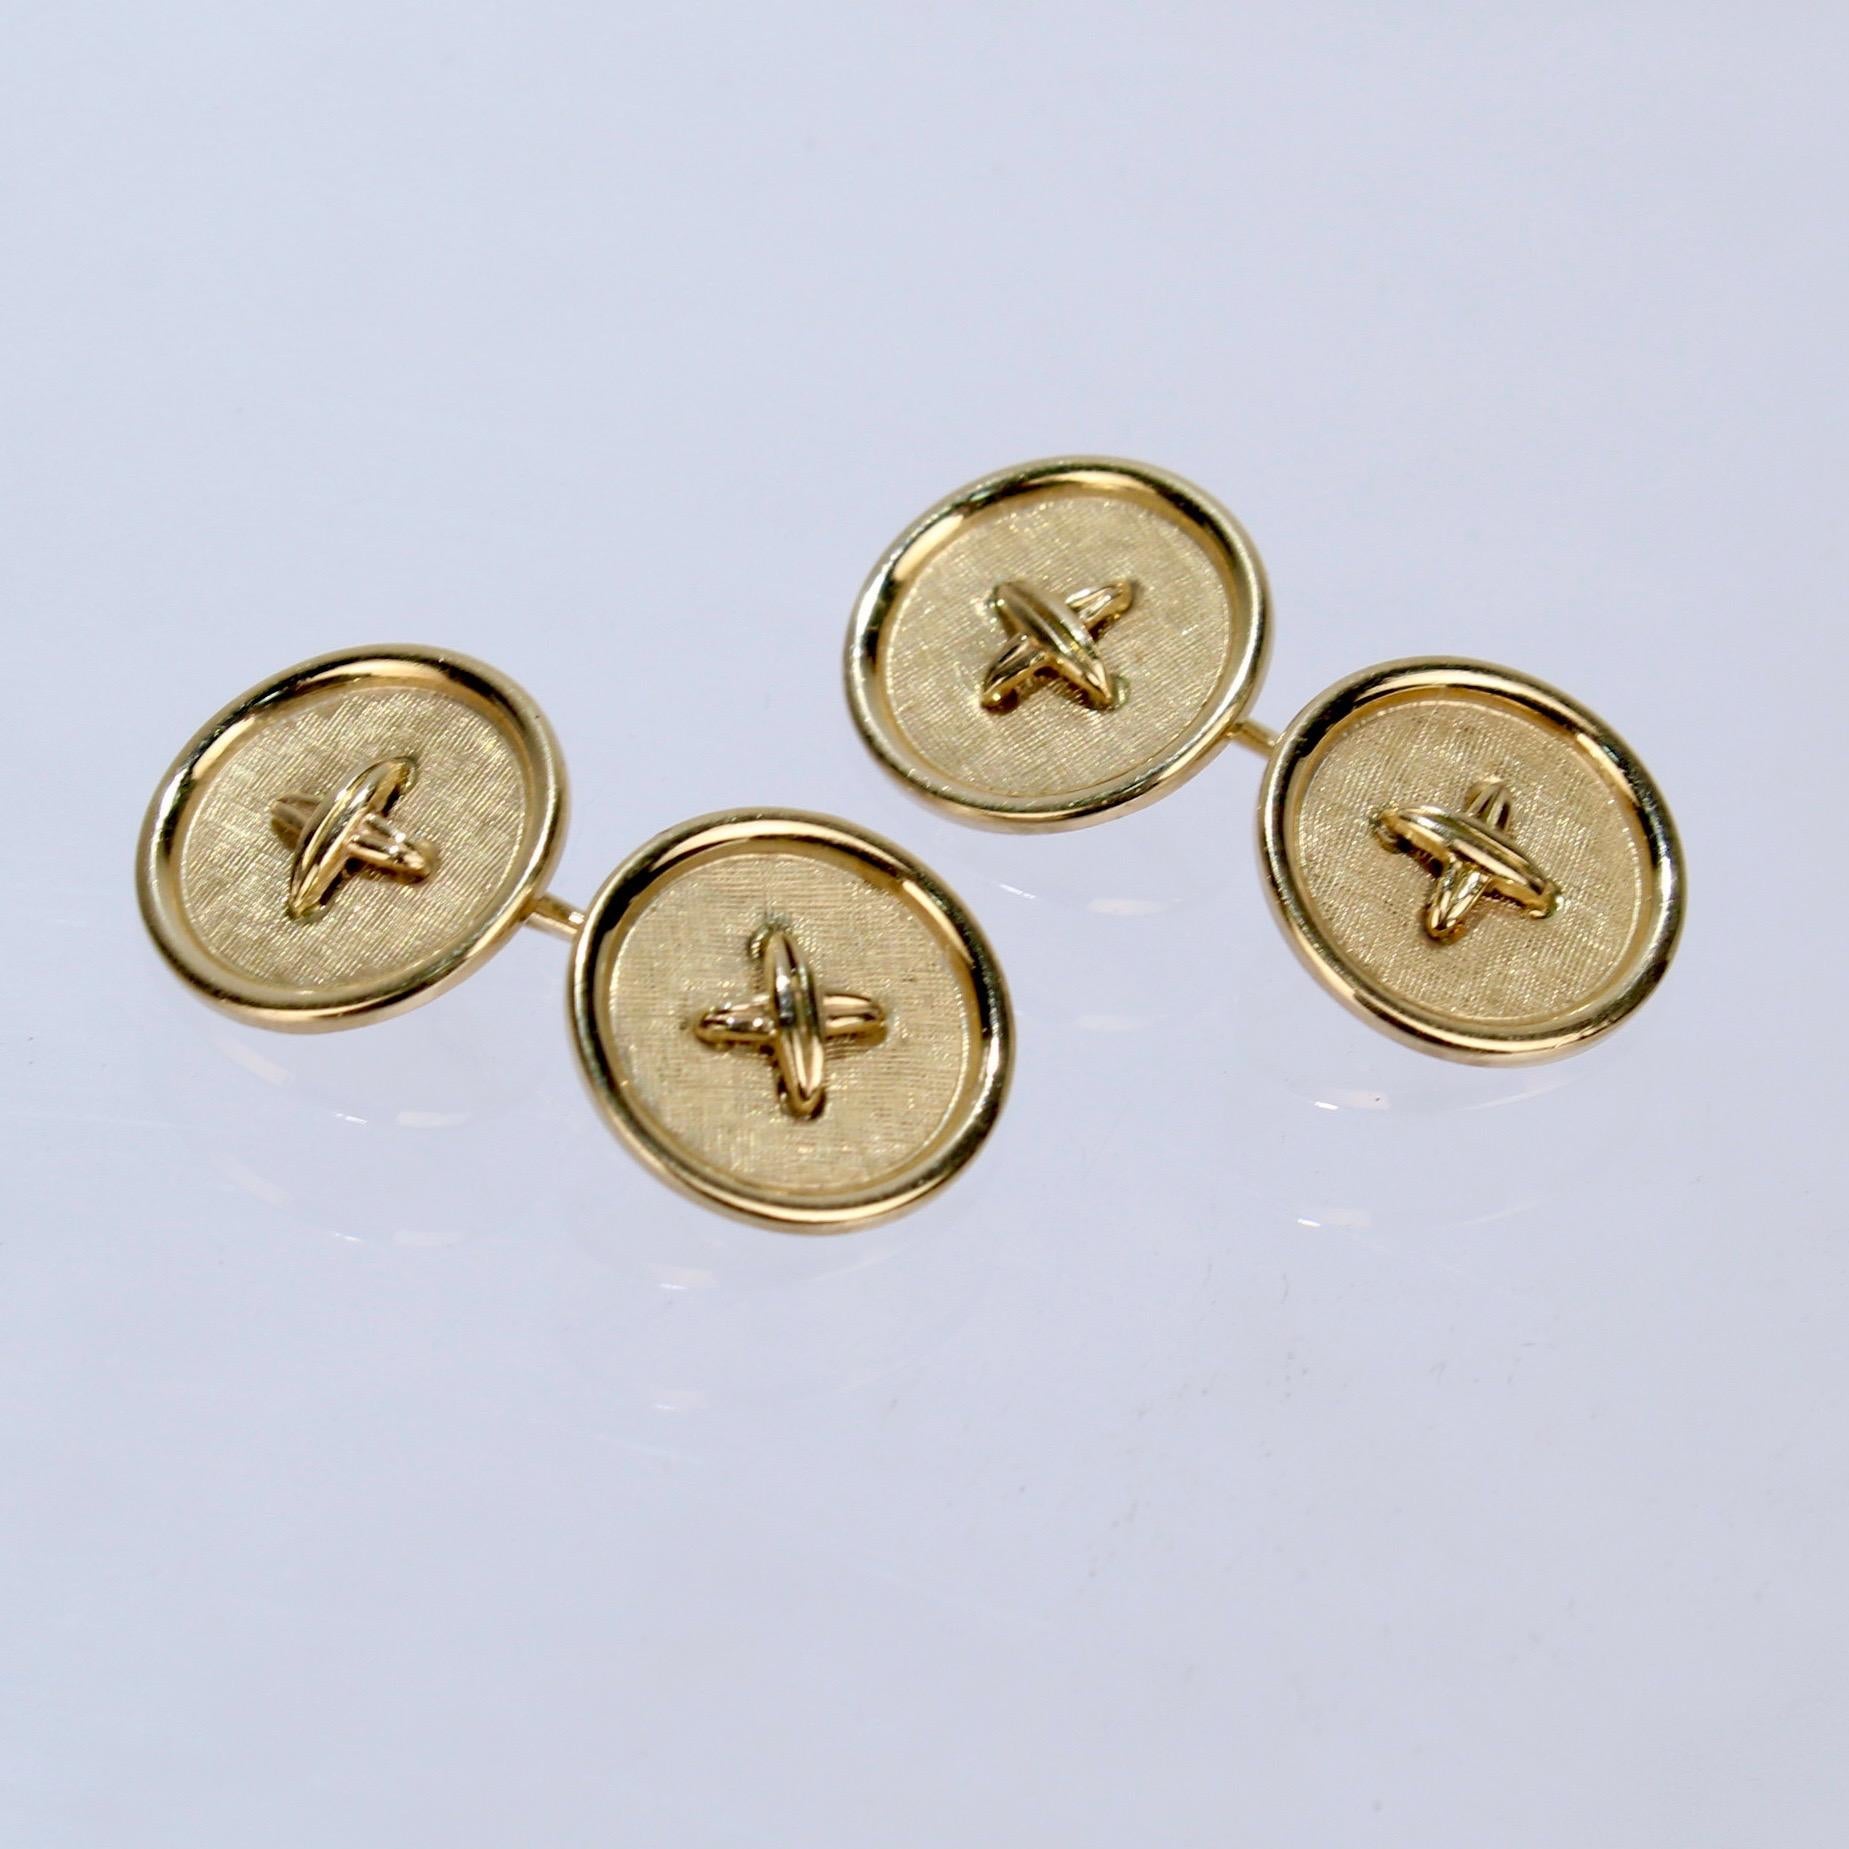 A wonderful pair of gold cufflinks in the shape of buttons.

A classic form that is a great addition to any cufflink collection!

Marked on the link 14K and with a model no. L2-778.

Length: ca. 20mm
Button Diameter: ca. 15 mm

Items purchased from